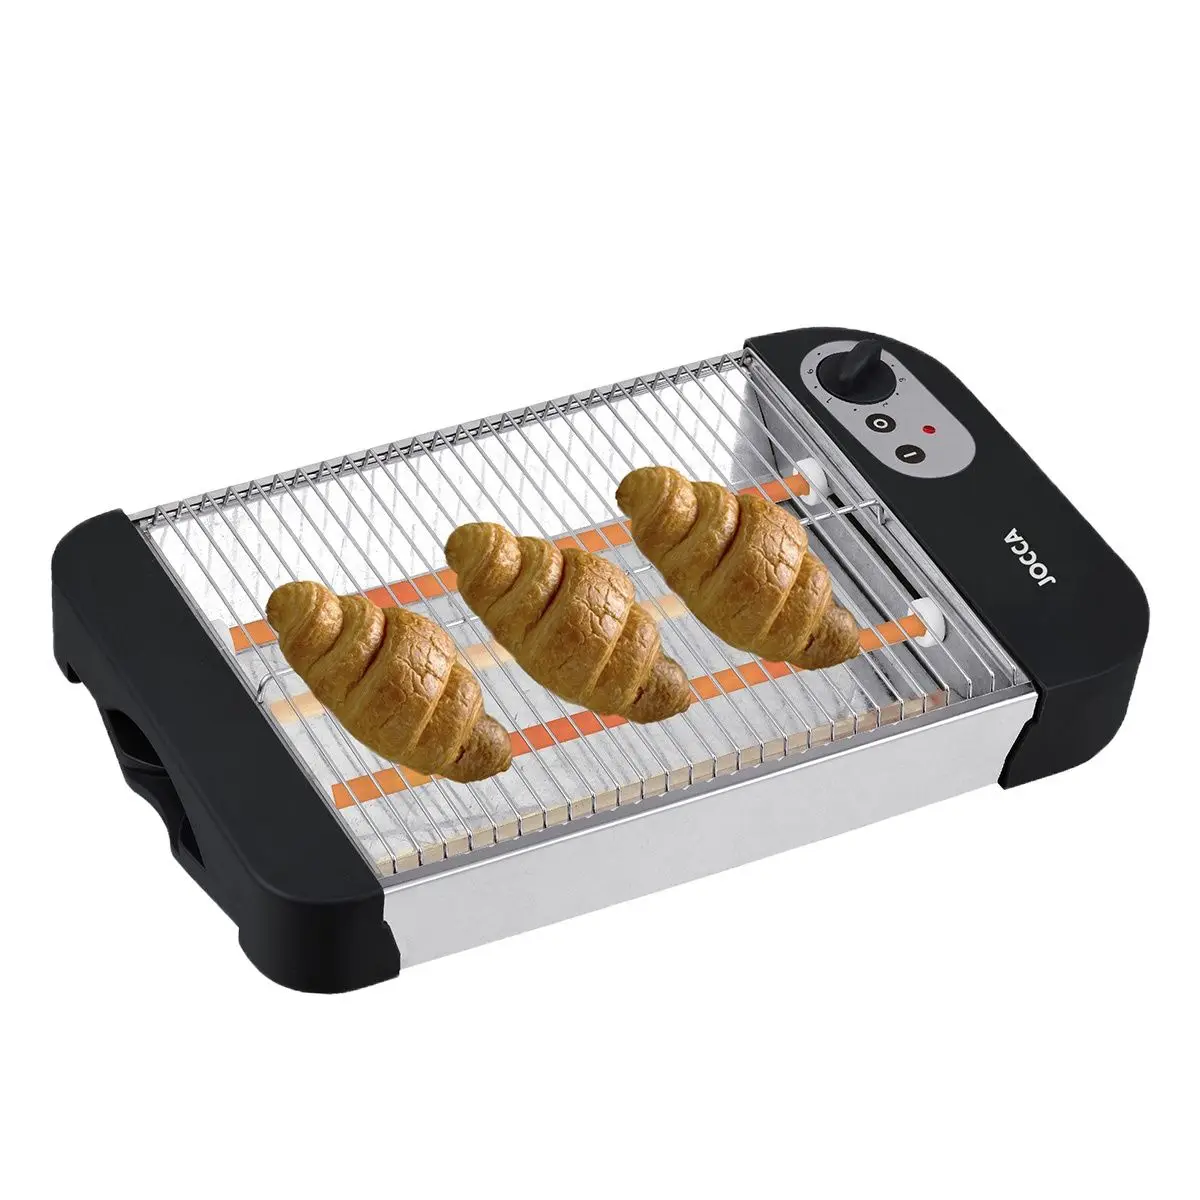 https://ae01.alicdn.com/kf/A95c374b2876c4281b0bdfd080983989fF/JOCCA-brand-HORIZONTAL-flat-electric-toaster-with-2-quartz-resistors-6-levels-and-600W-power-to.jpg